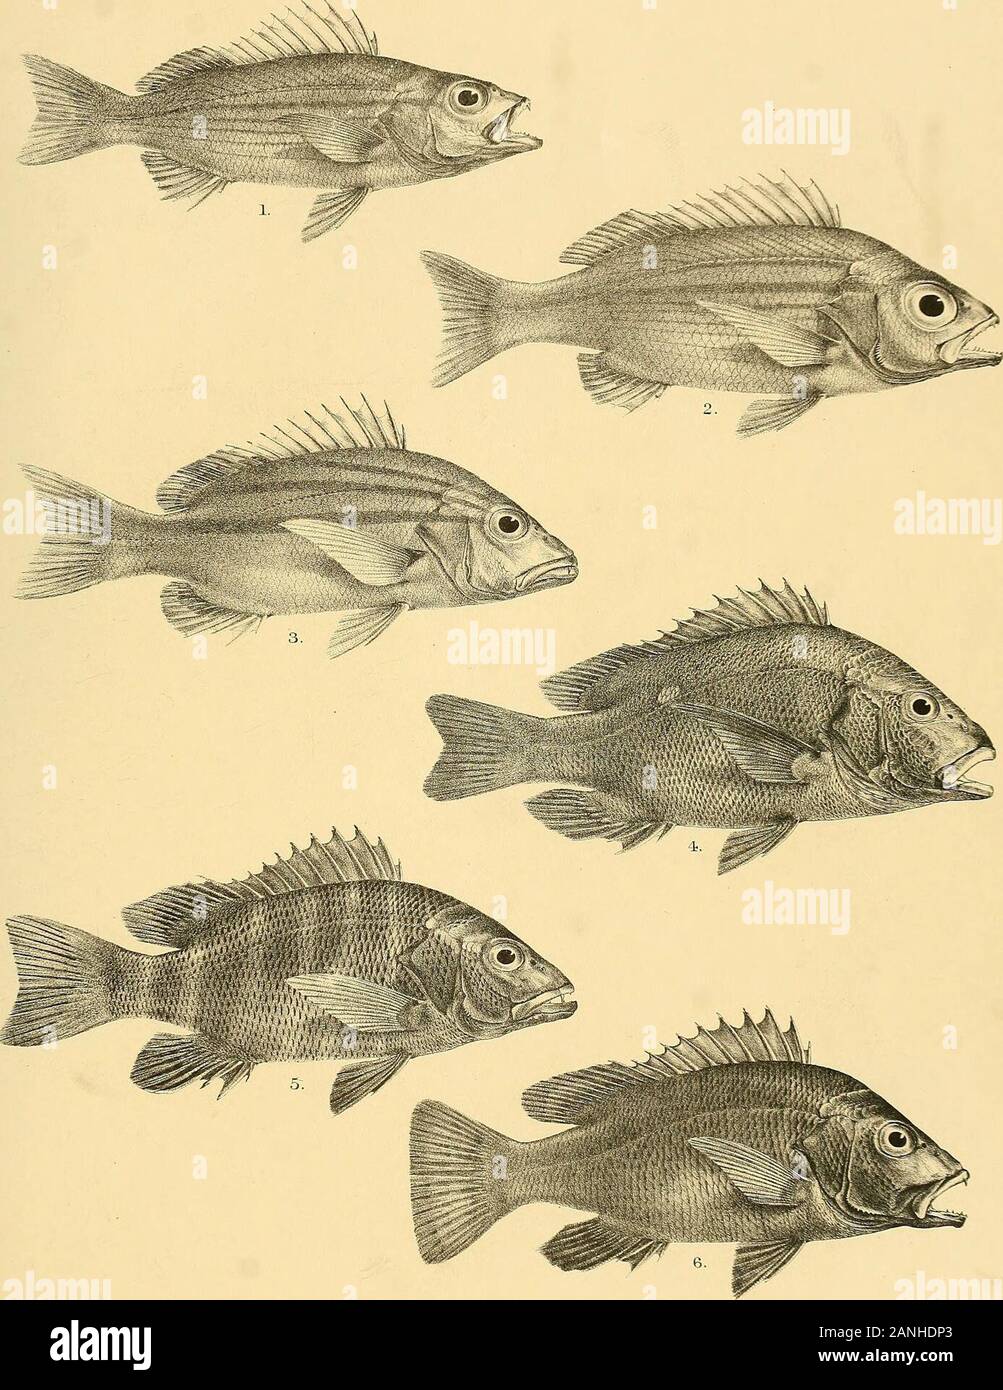 The fishes of India; being a natural history of the fishes known to inhabit the seas and fresh waters of India, Burma, and Ceylon . G.H Ford del Rl&il ei Minterii Bros ma 1, LUTIANUS ERYTHROPTERUS (YOUNG) 2, L.ERYTHROPTERUS ( ADULT.) 3,L BODECACANTHUS4.L.BENGALENSIS. 5, L.FULVUS. 6, L.B1GUTTATUS. Days Fishes of India. ! to XI.. GH.Ford del J R.King Kh. ^?imtem Bros. rare. 1, LUTIANUS L1NE0LATUS. 2, L.L1NE0LATUS (VAR. NOULENY.) 3, L.CHRYSOT^NIA.4.L.RIVULATUS. 5, L. ARGENTIMACULATUS. 6. L.ROSEUS. Days Fishes of India. Plate XII. Stock Photo